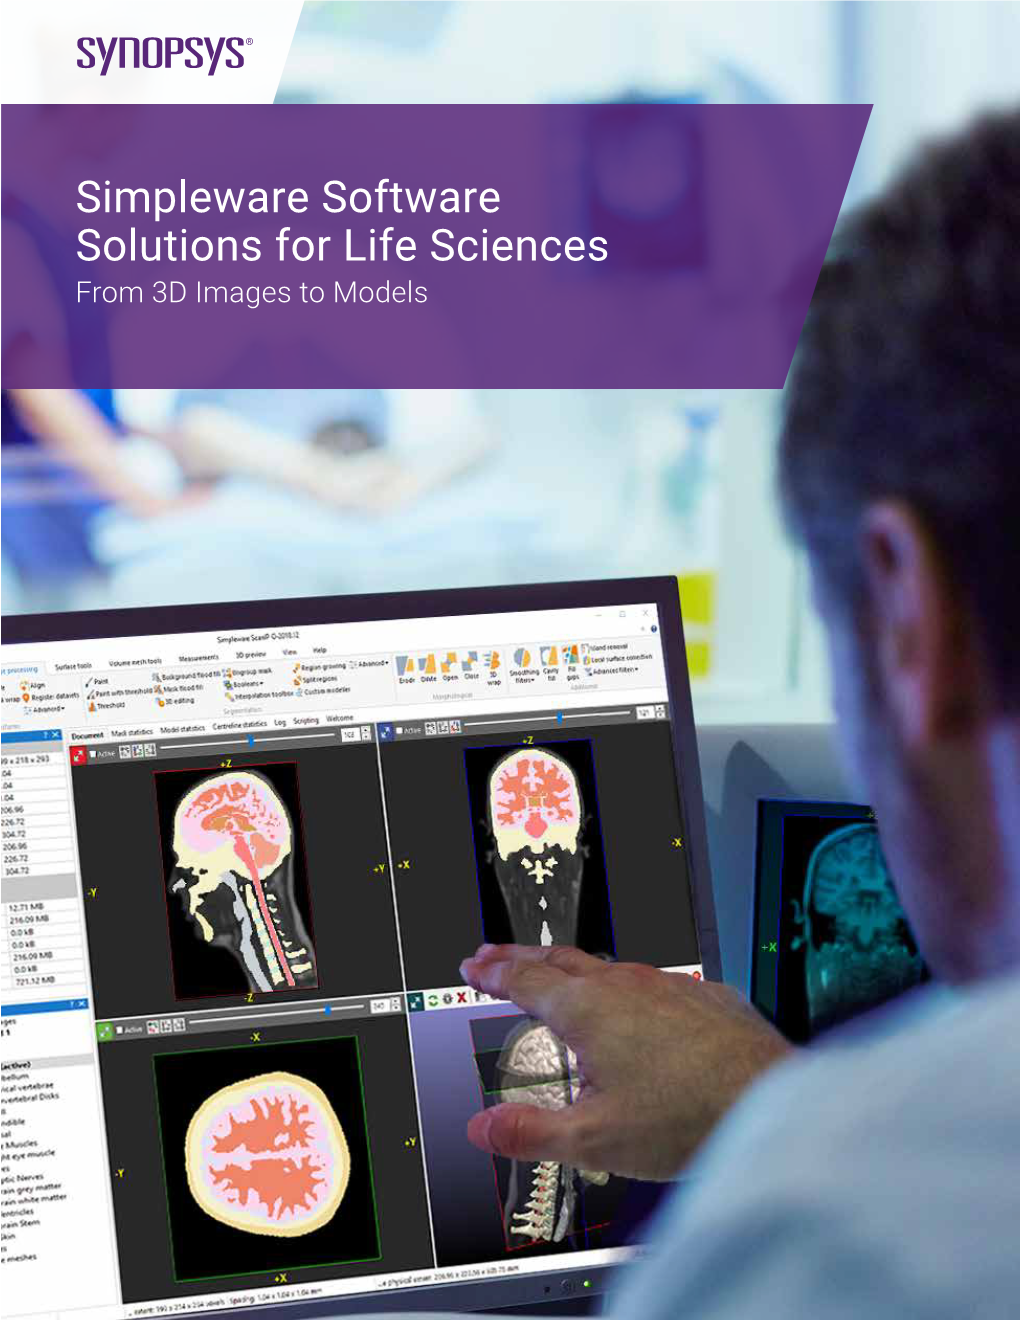 Simpleware Software Solutions for Life Sciences from 3D Images to Models Applications in Life Sciences